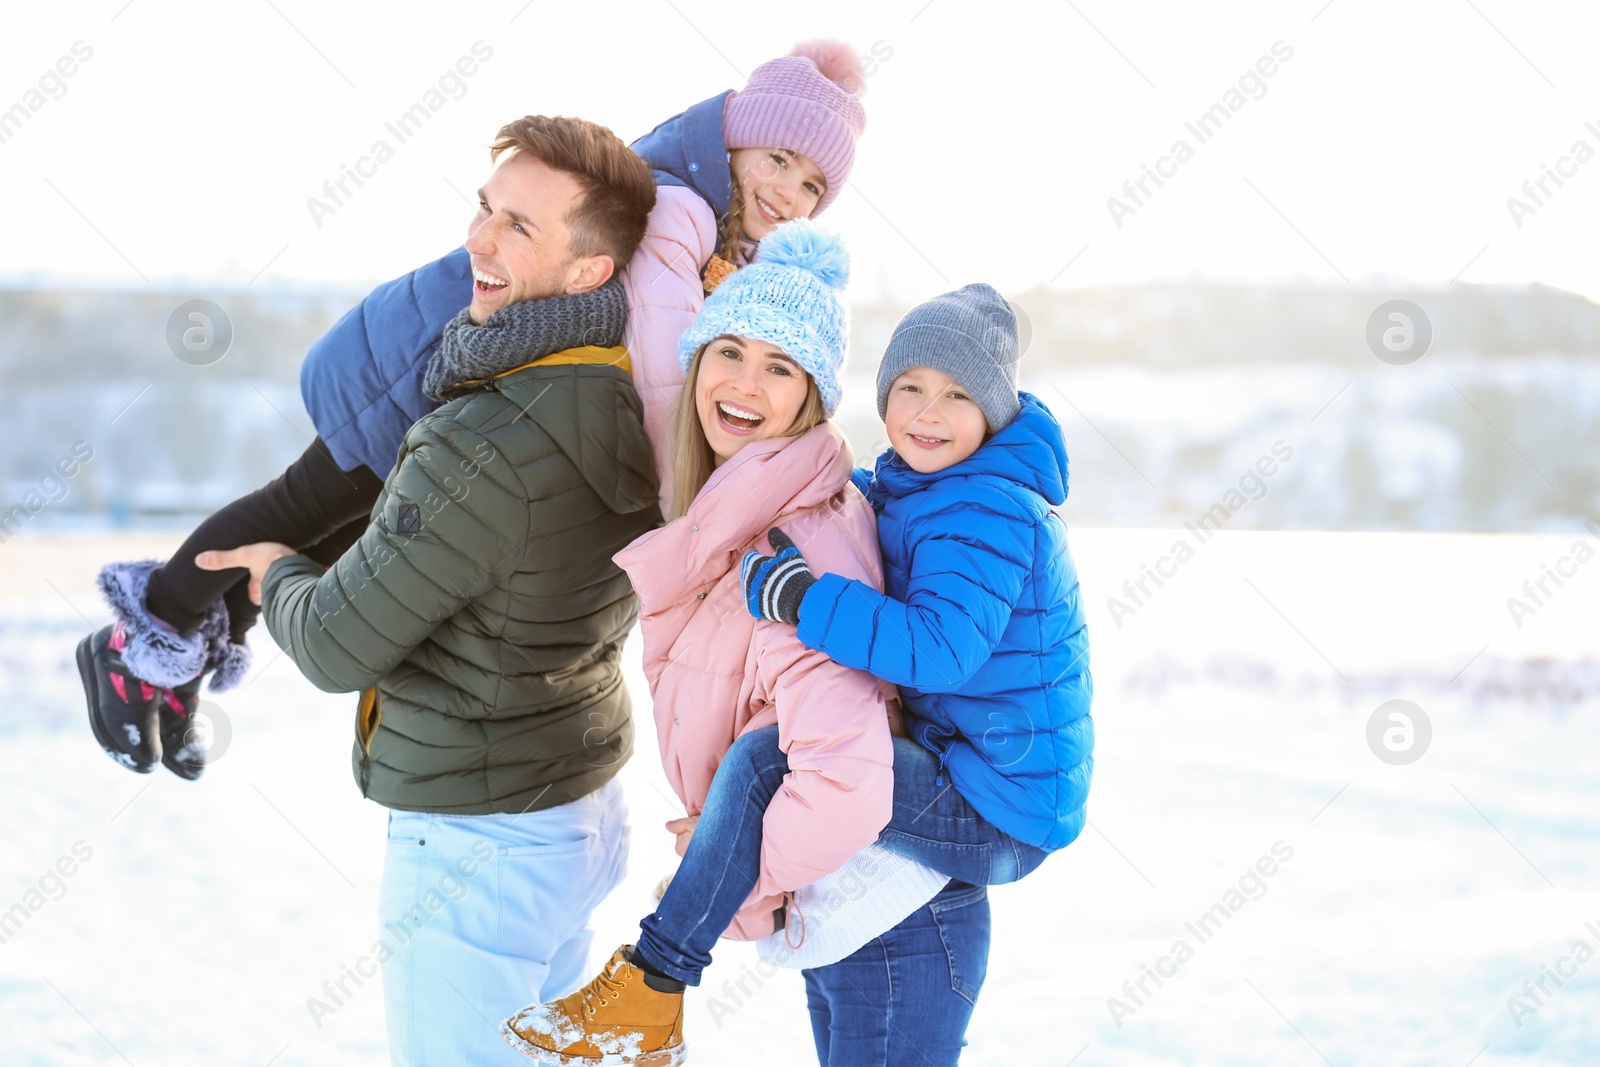 Photo of Happy family having fun outdoors on winter day